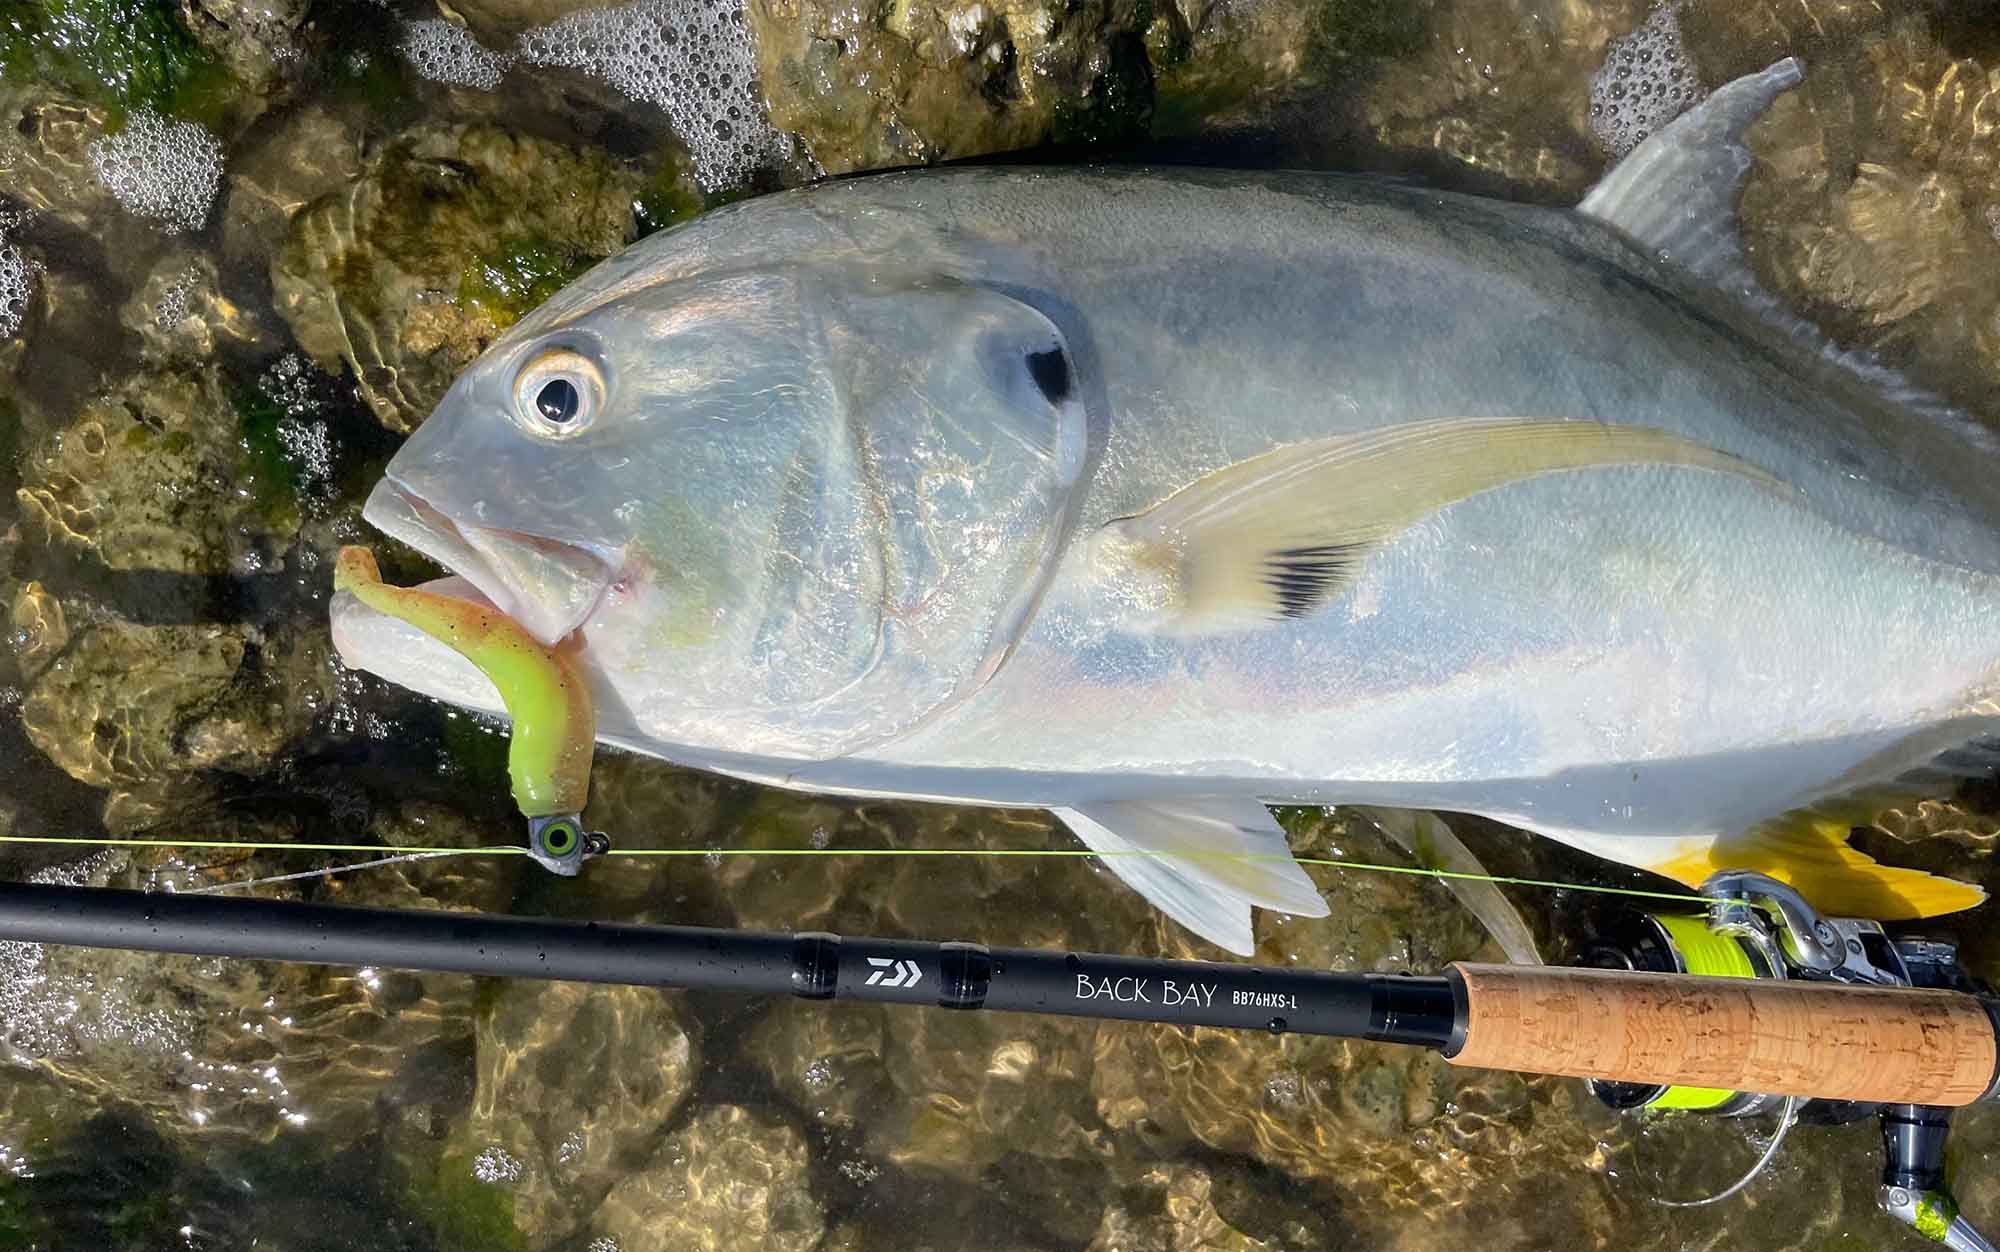 Fish lays on rocks with plastic lure in its mouth.